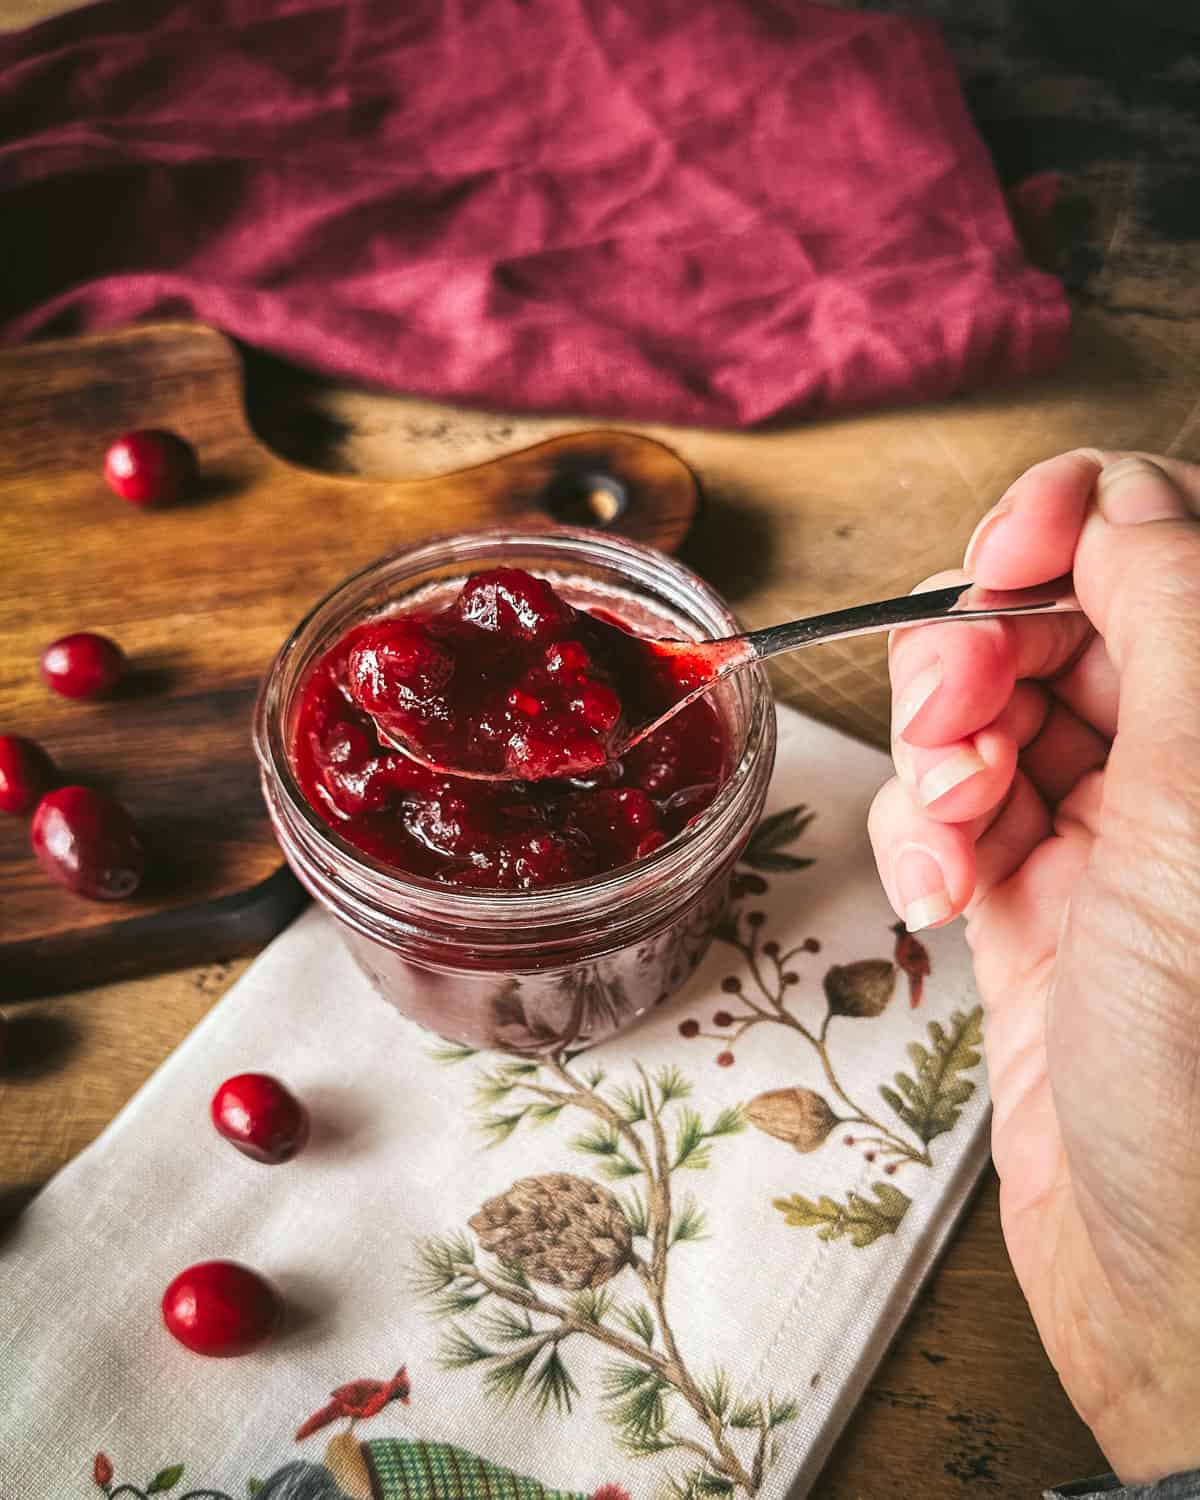 Pickled cranberries being spooned out of a jar, sitting on a white napkin with flowers, on a wood cutting board, surrounded by fresh cranberries.